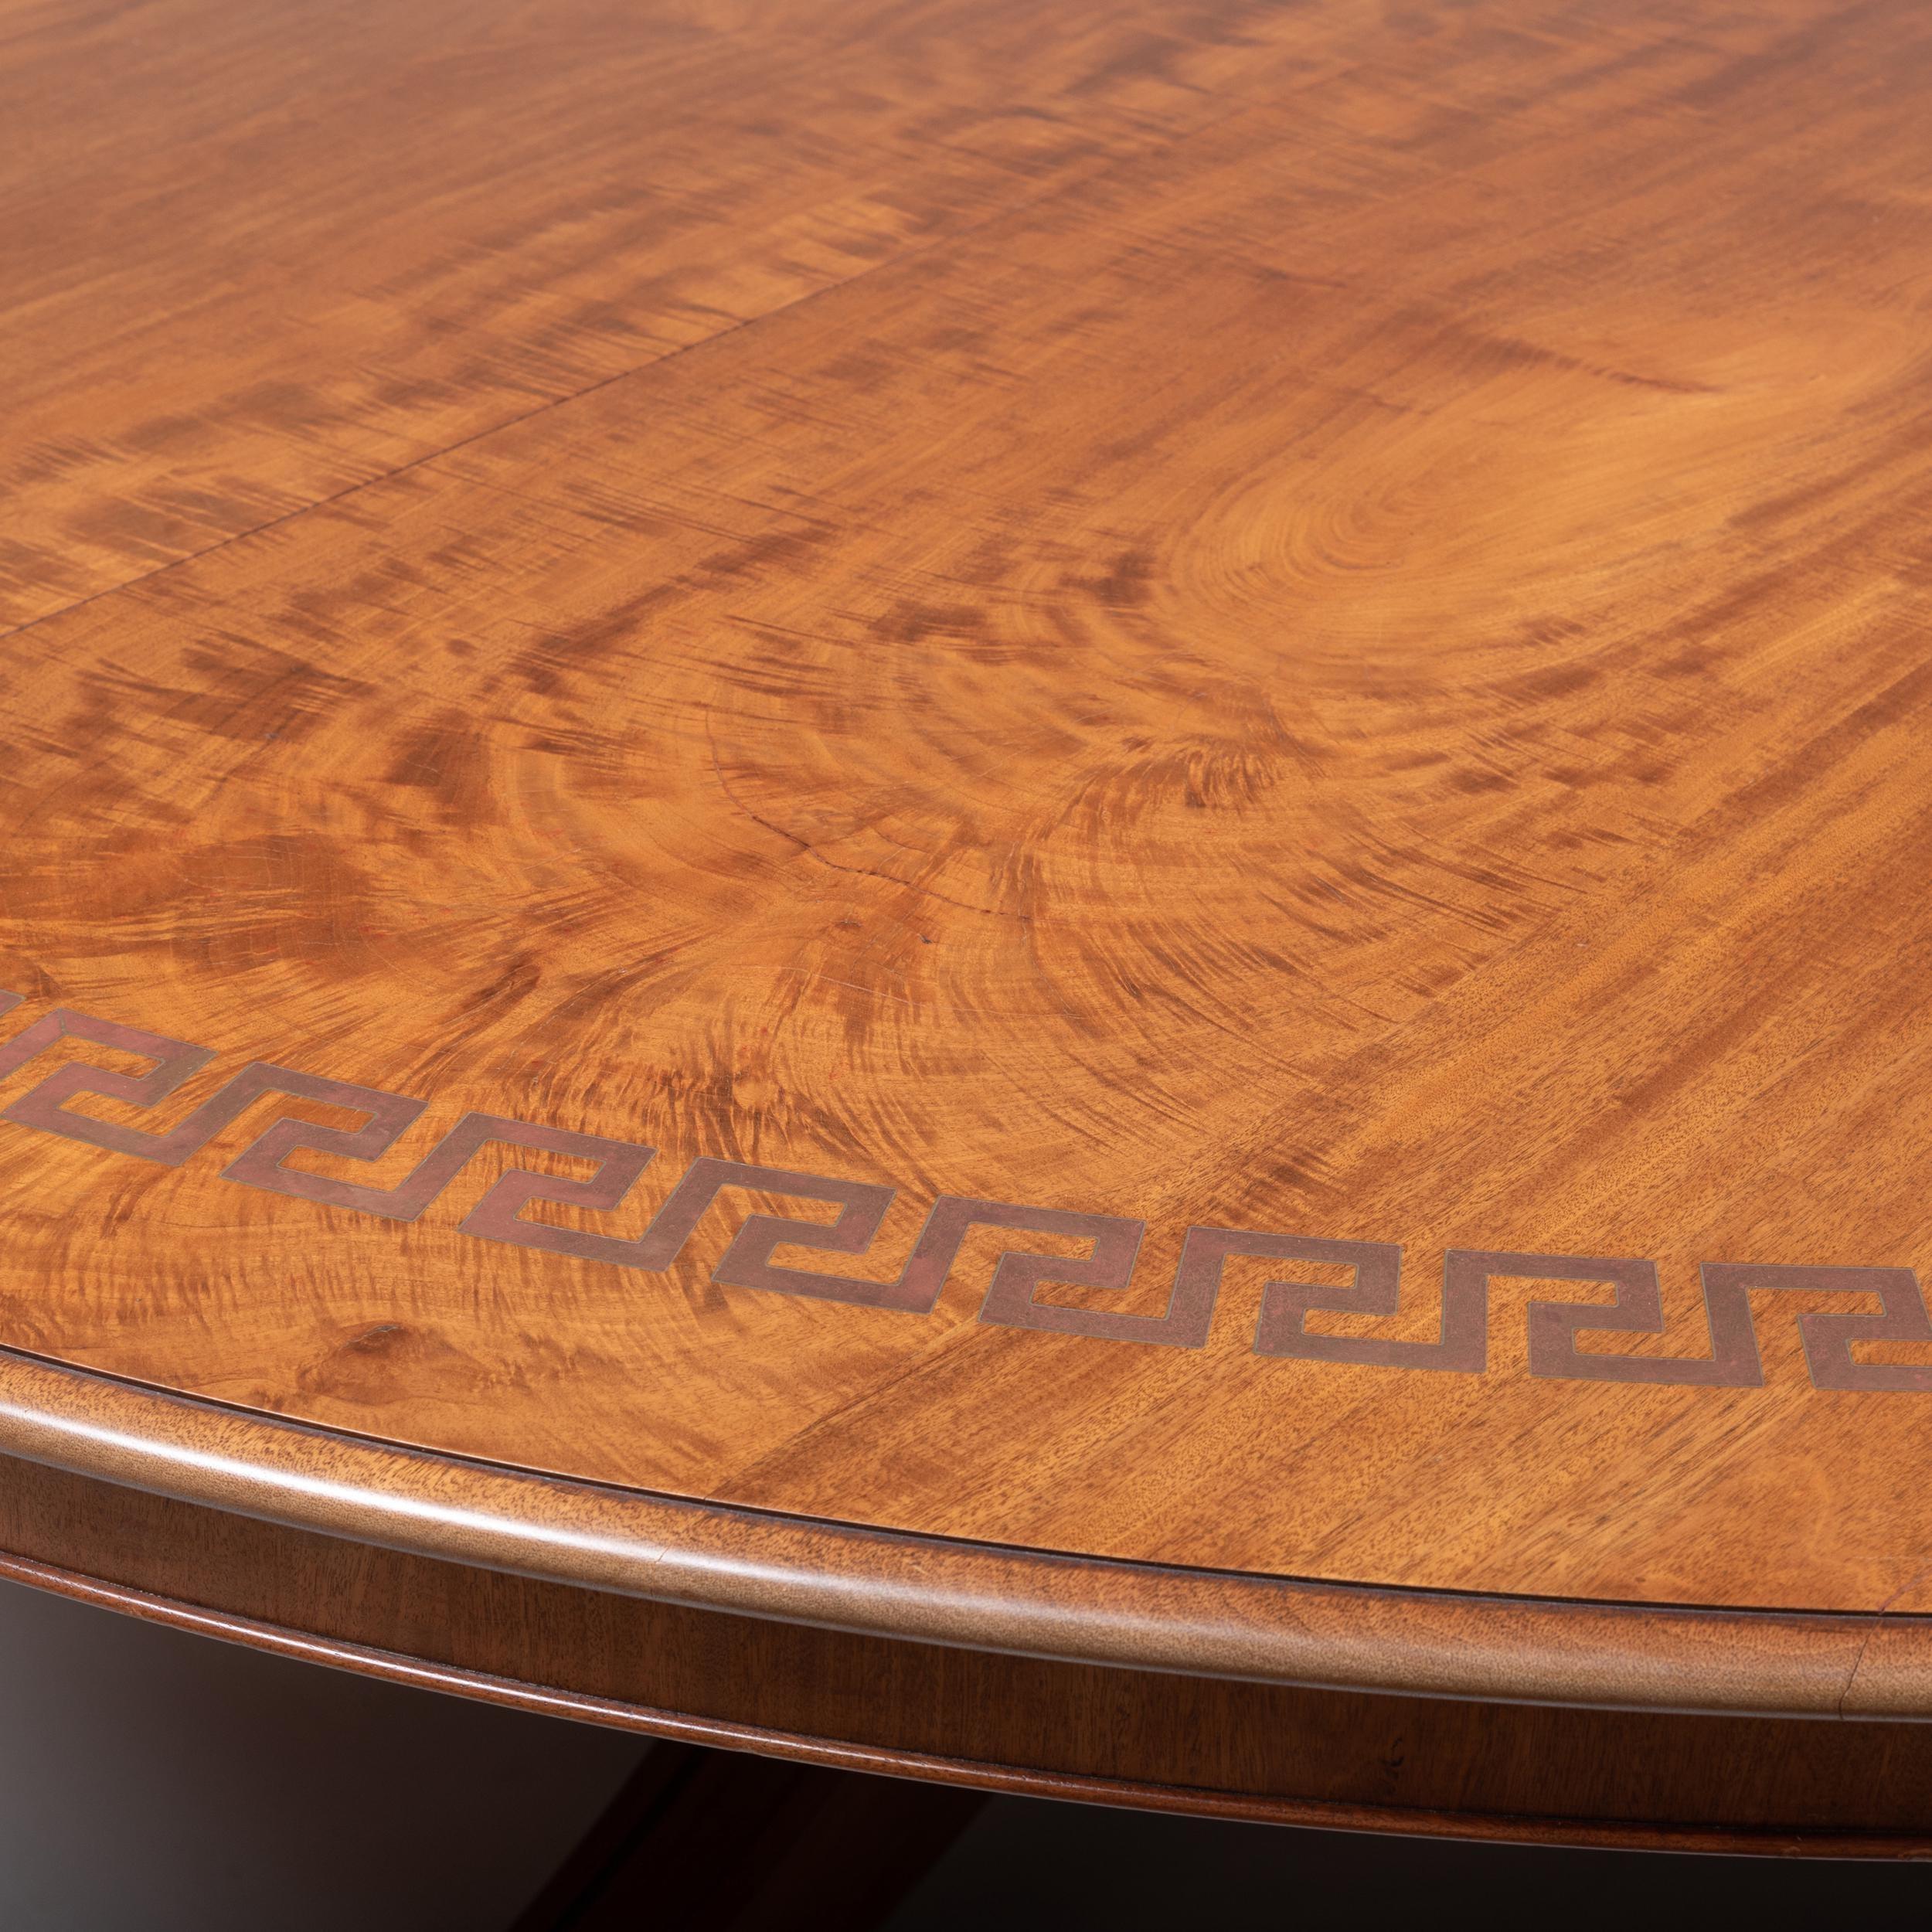 Round mahogany dining table in George III style with Greek key design at perimeter in brass inlay. Table sits on pedestal base with four curved legs ending in brass caps.